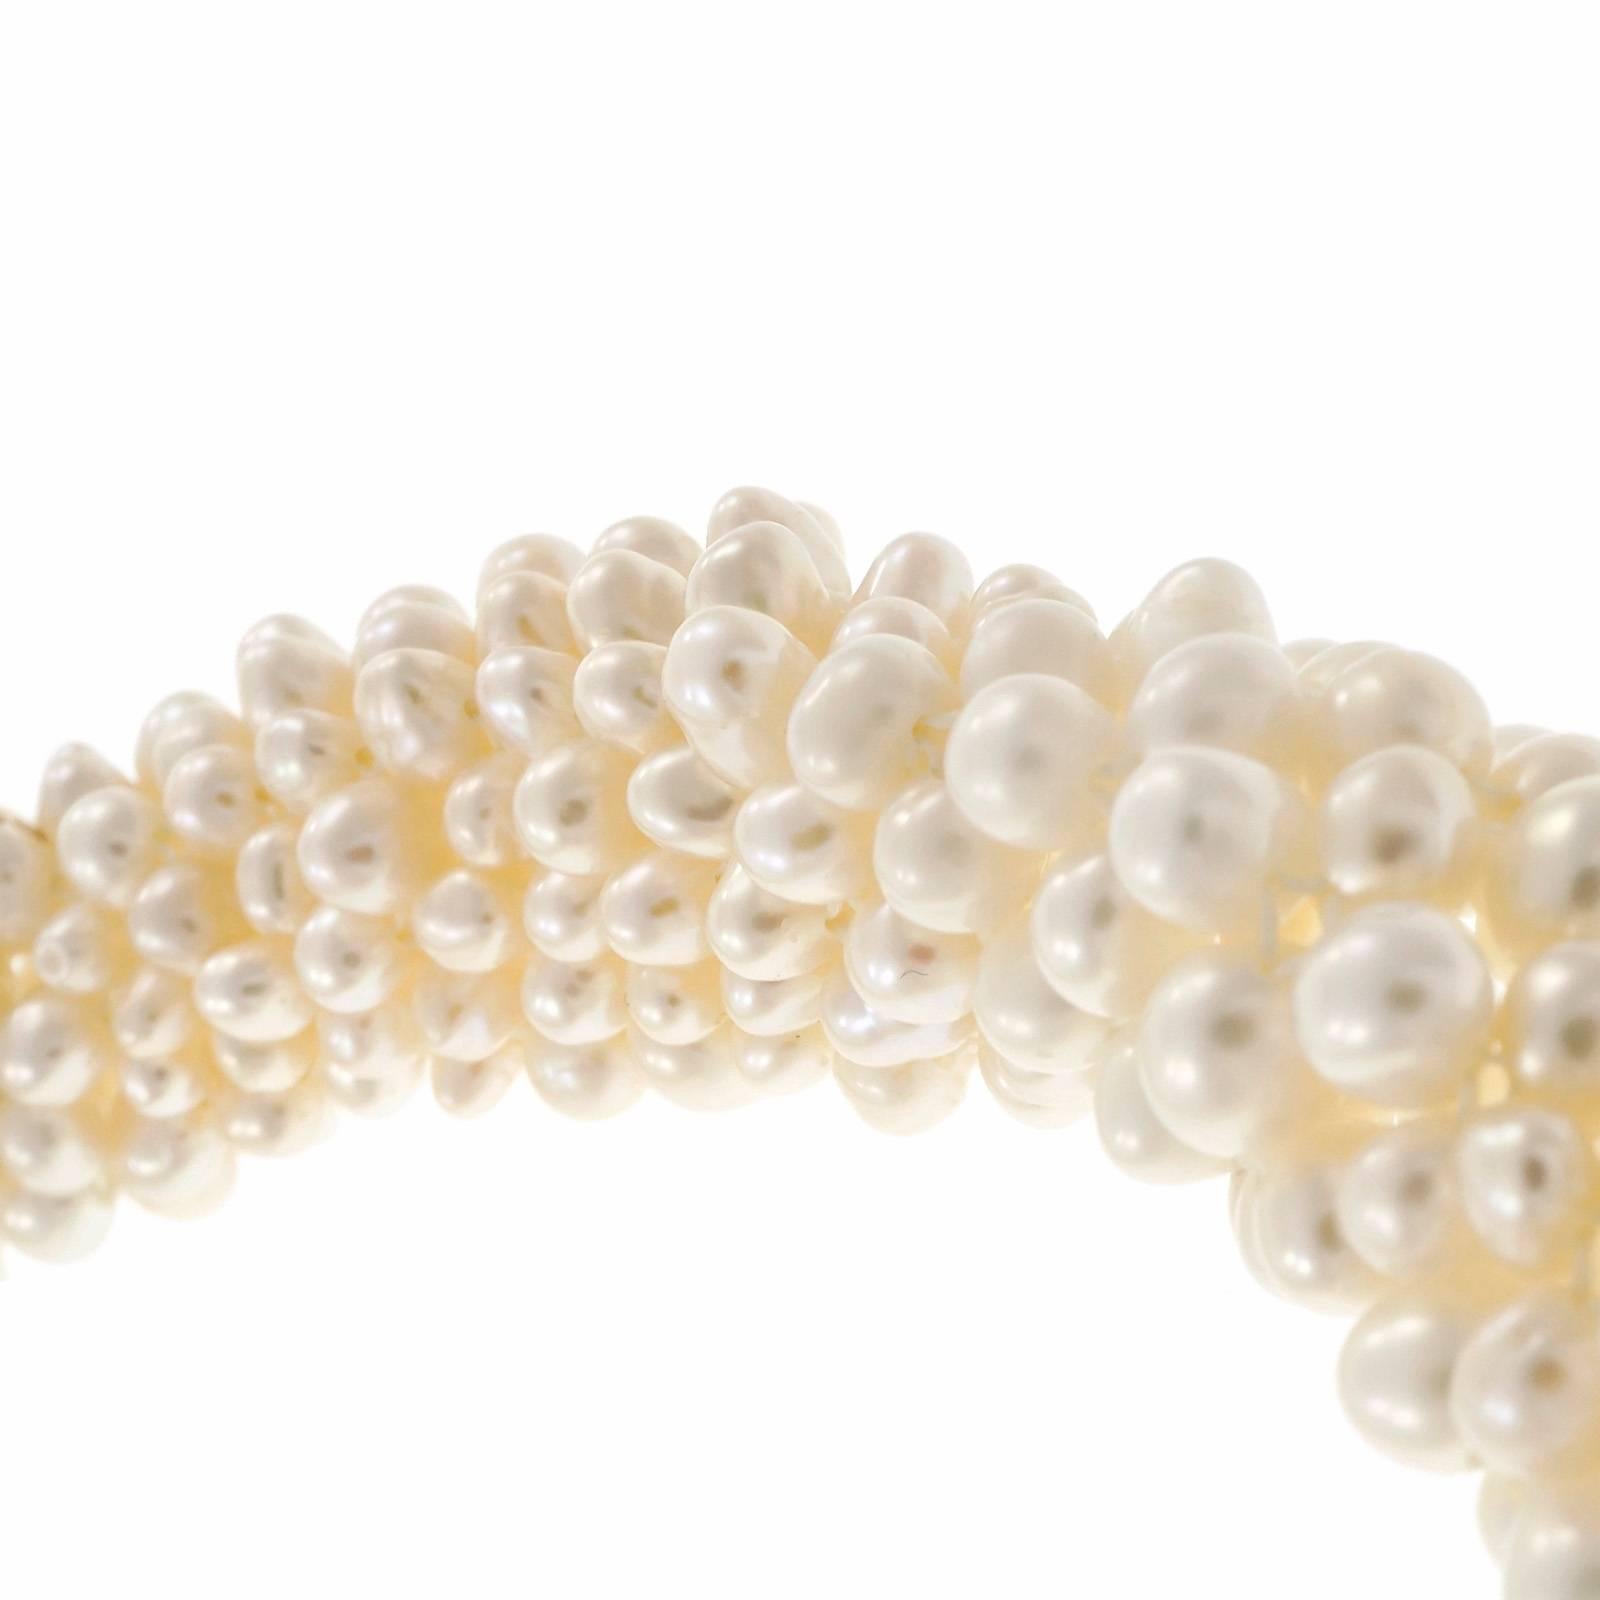 Spectacular Freshwater cultured pearl round and diamond necklace. Set with approximately 1,300 pearls, accented by60 round 14k yellow gold beads and 54 round cut diamonds. 16.5 inches in length with a 14k yellow gold textured clasp. 

14k two-tone